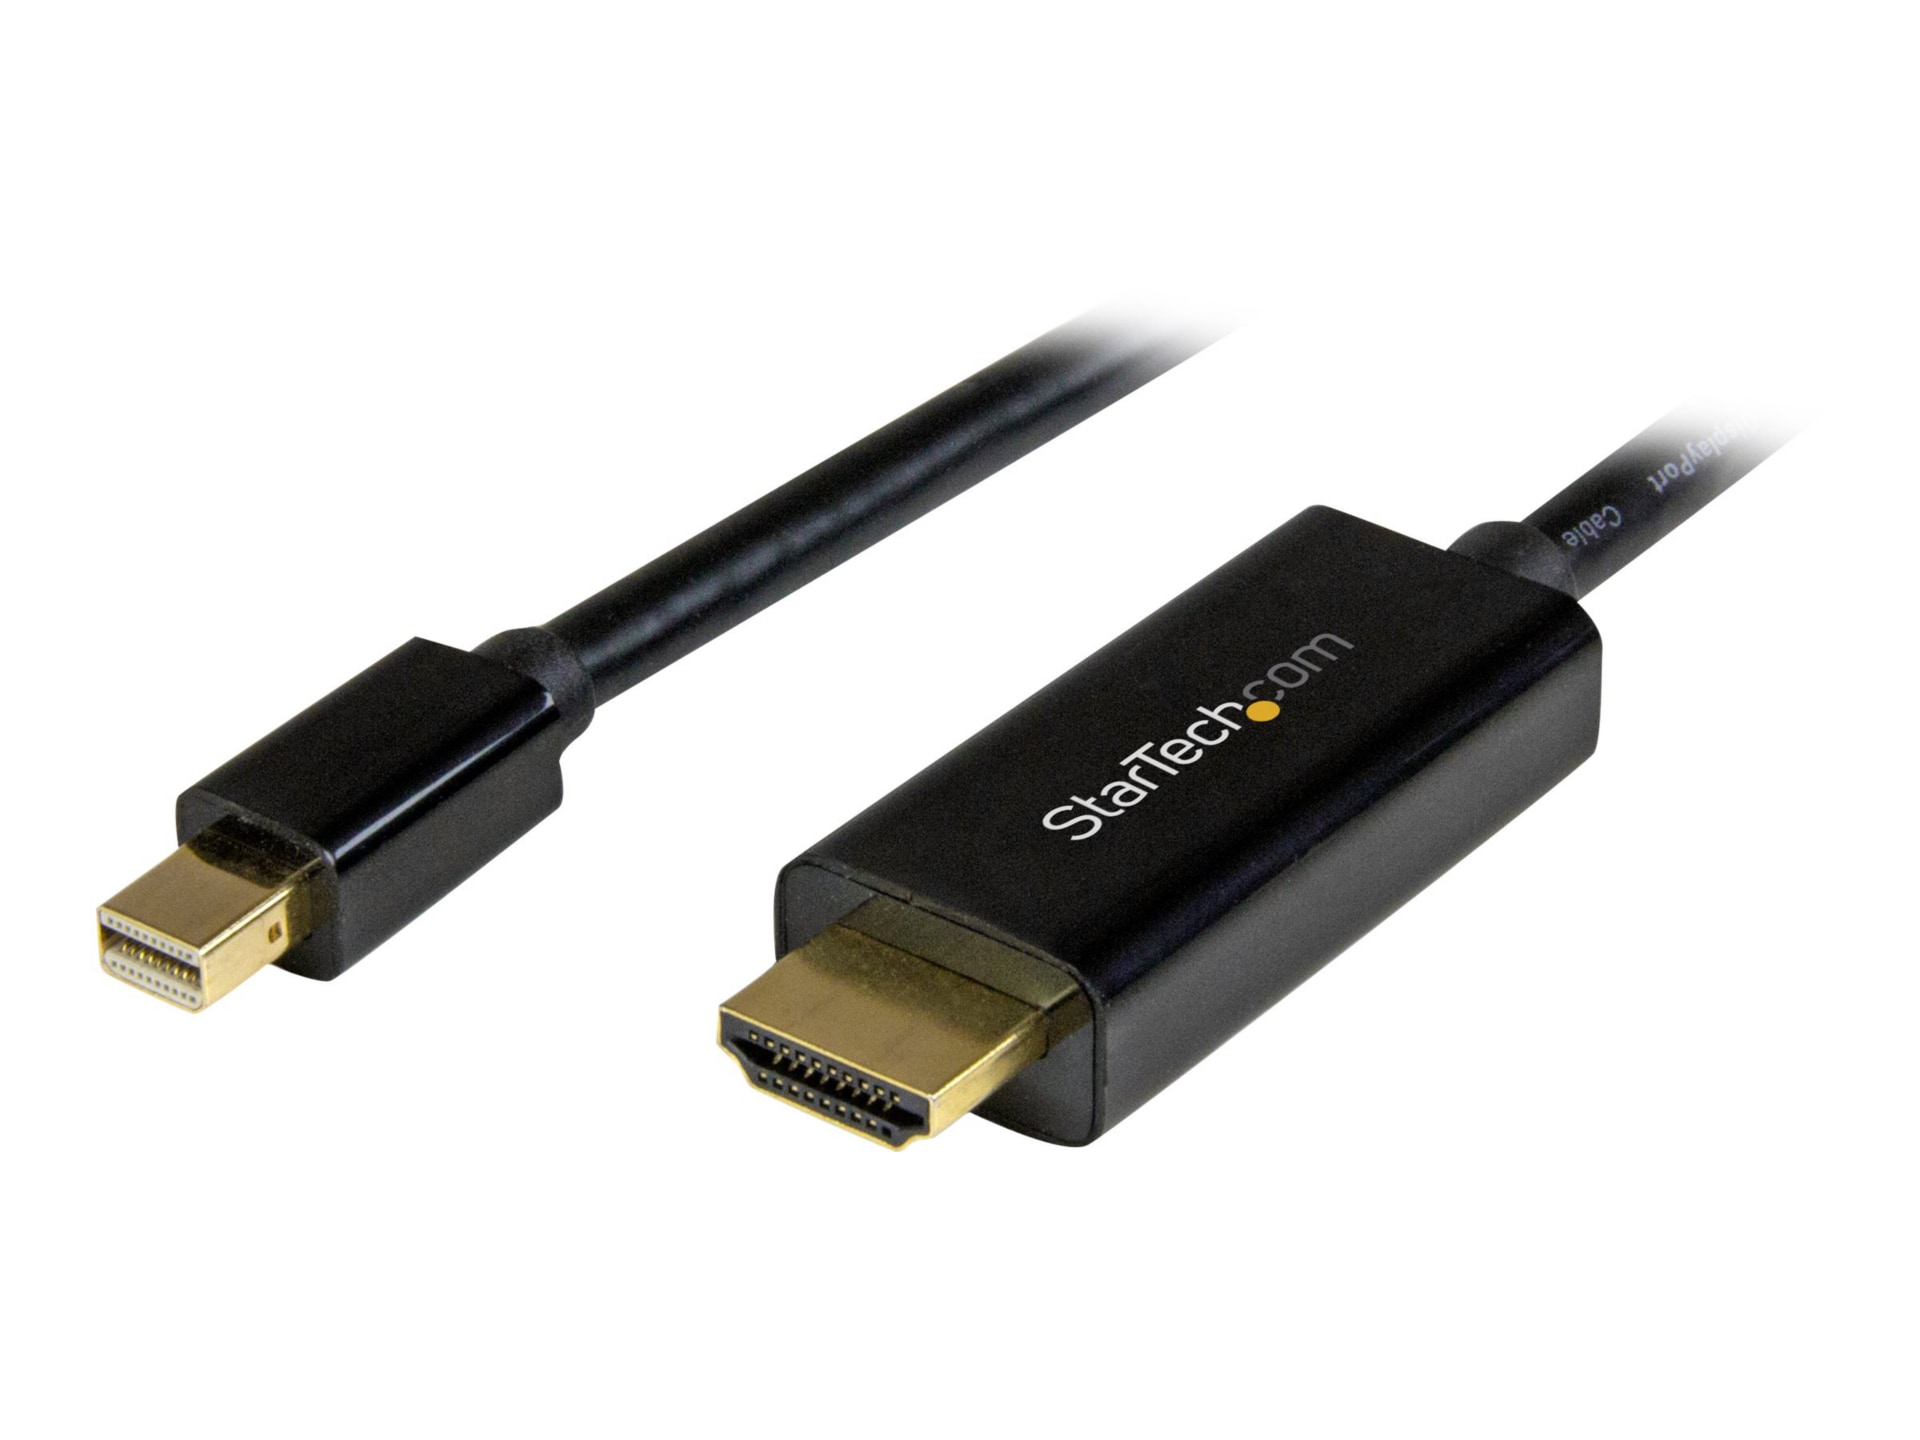 StarTech.com 6ft 2m Mini DisplayPort to HDMI Cable - 4K mDP to HDMI Adapter